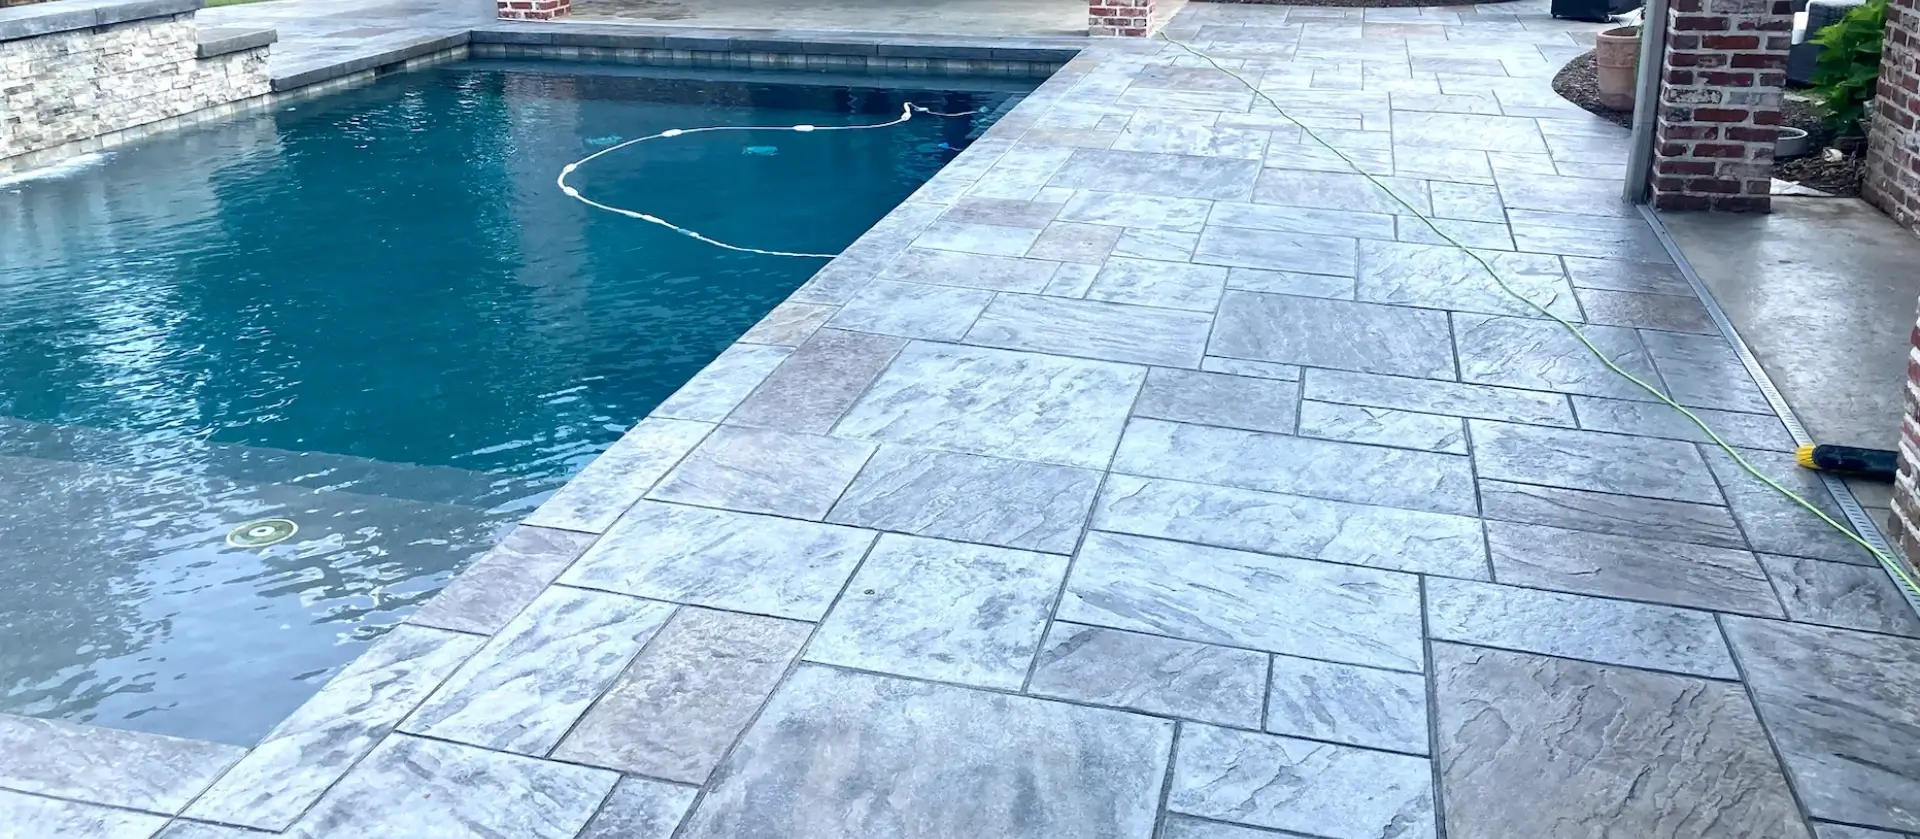 A pool with a tile floor and a stone wall.